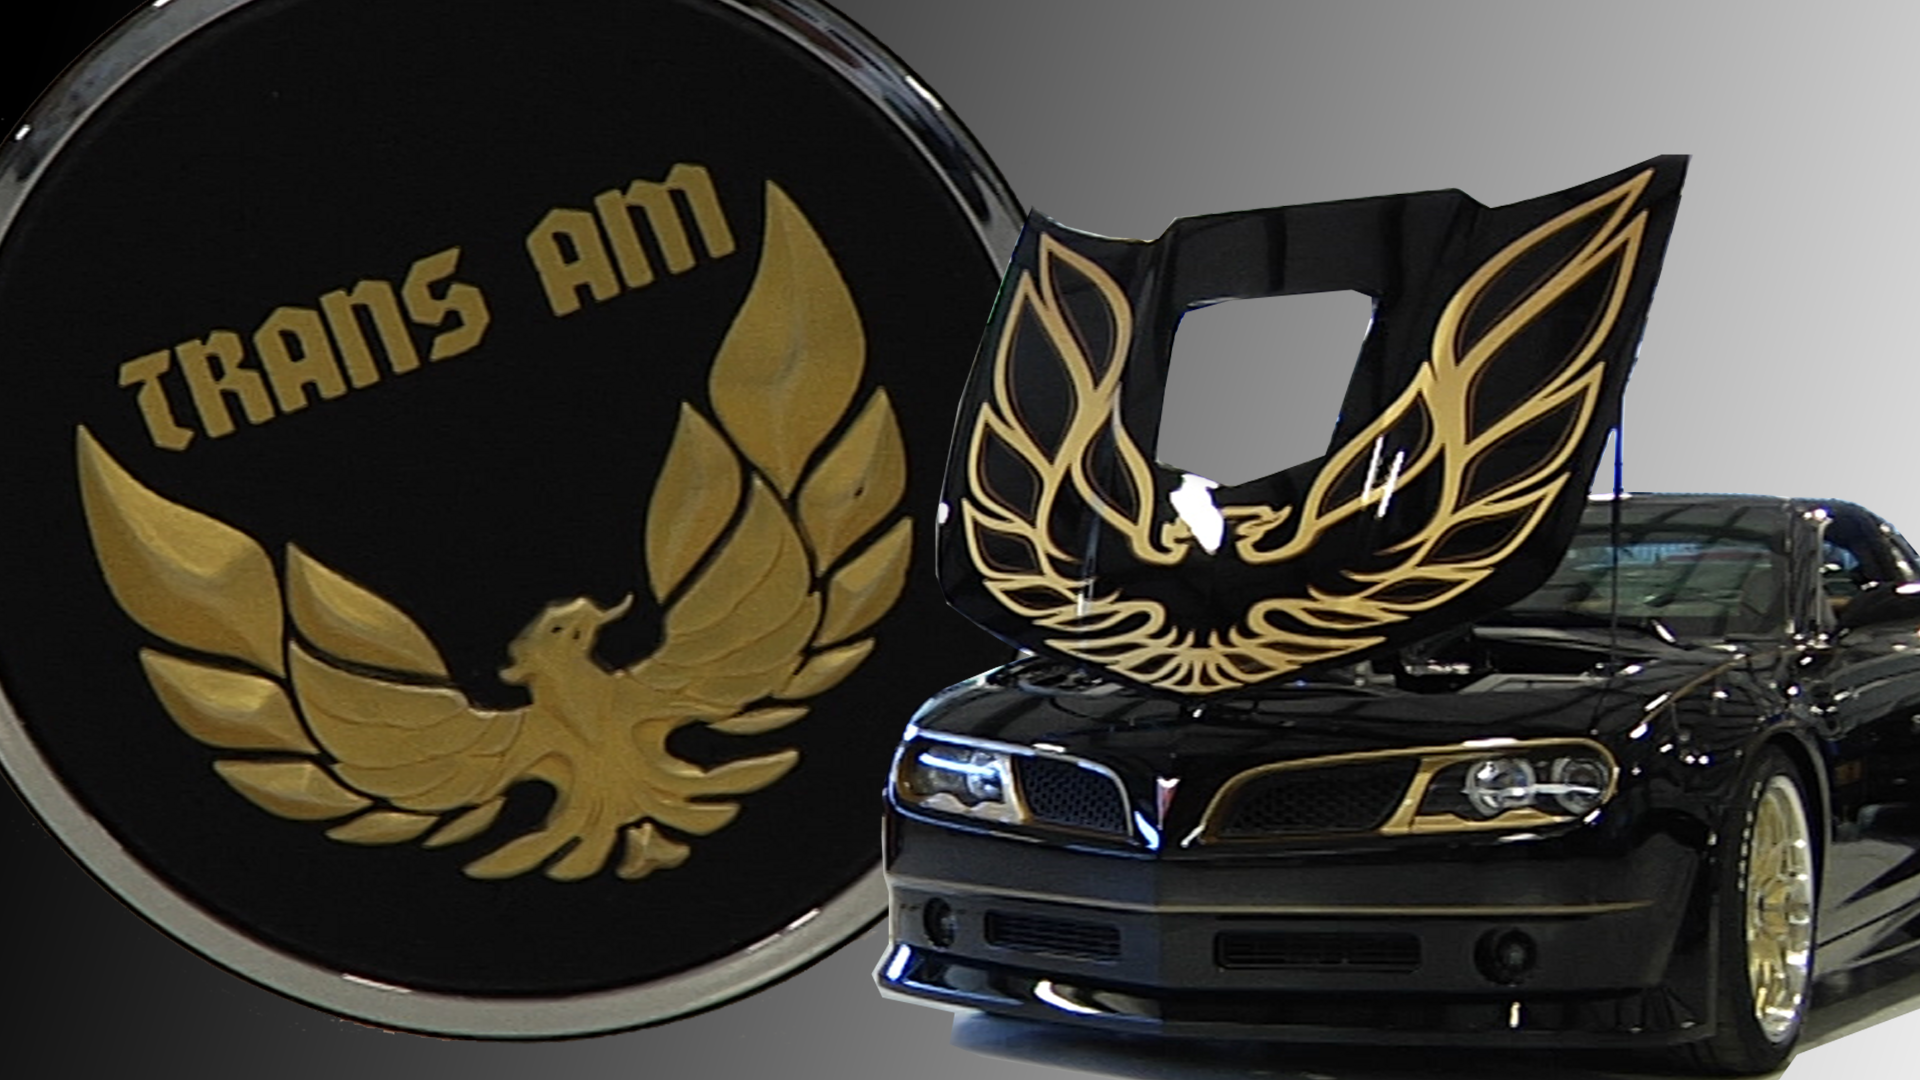 Return of the Trans Am